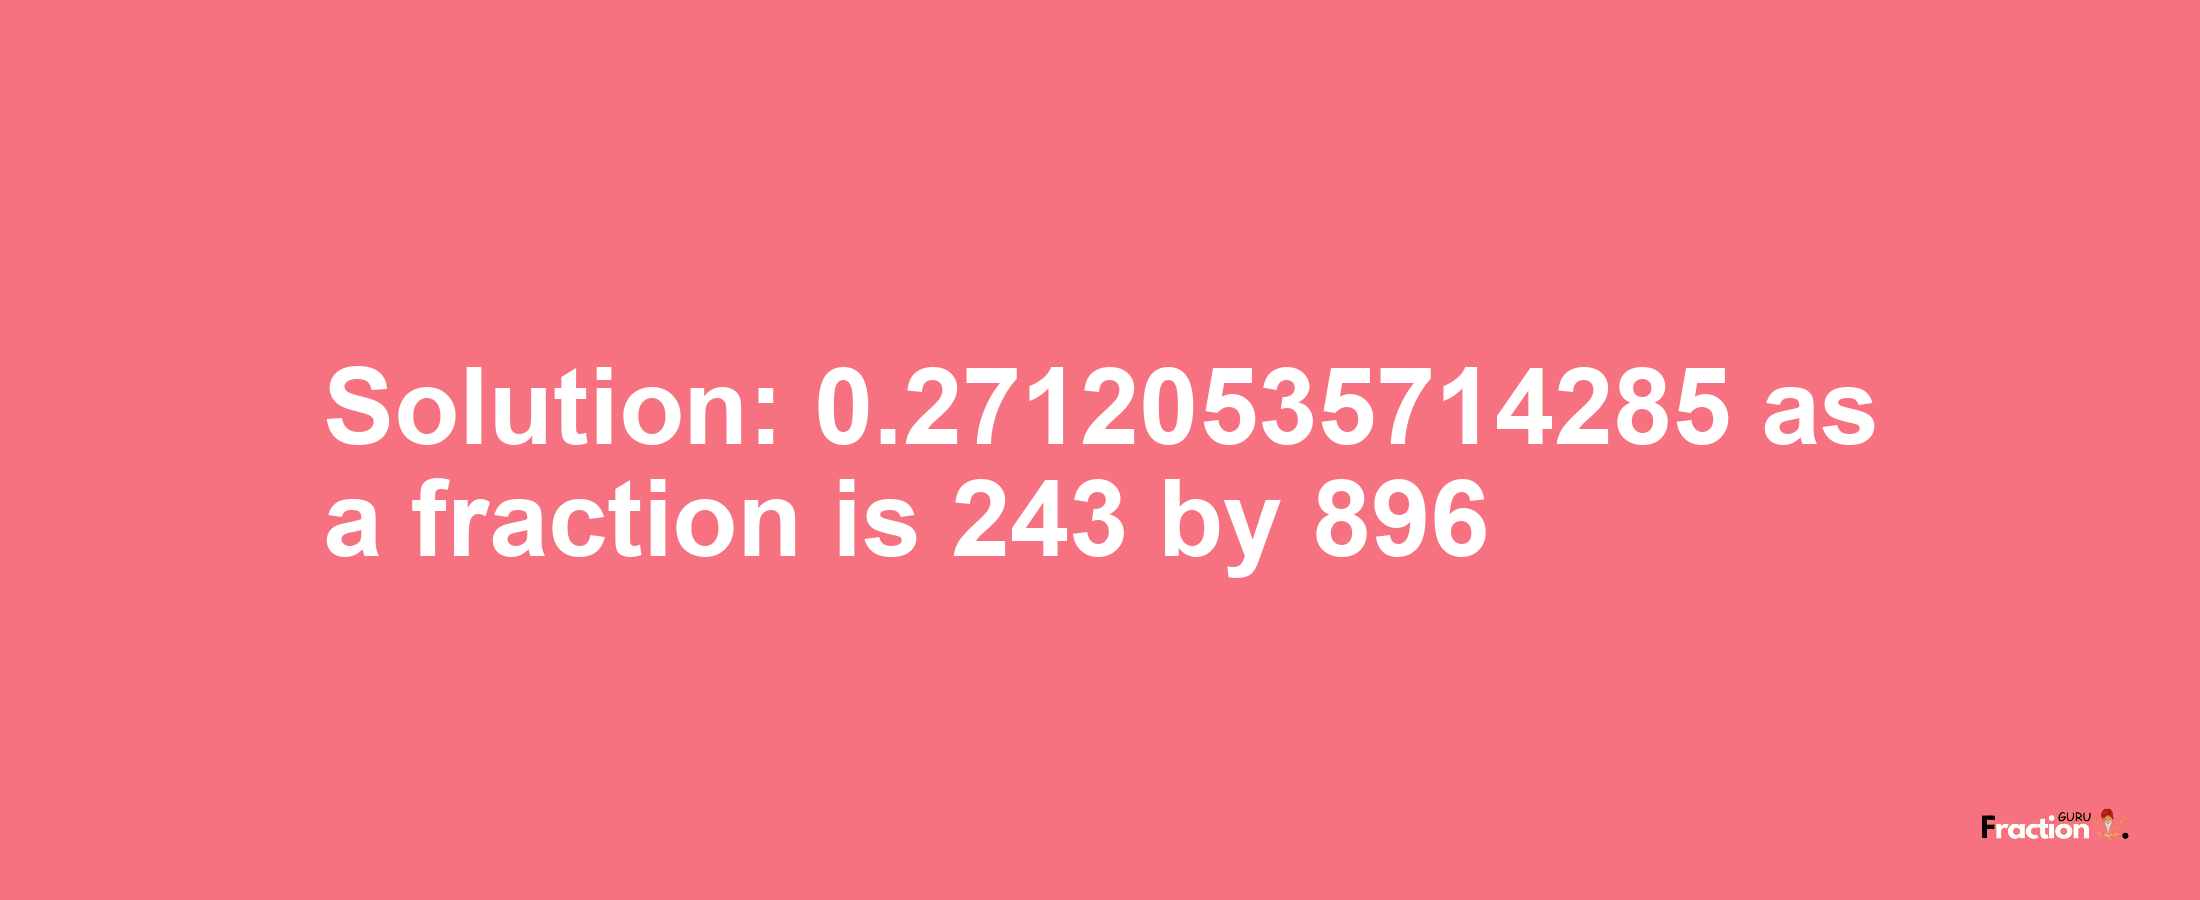 Solution:0.27120535714285 as a fraction is 243/896